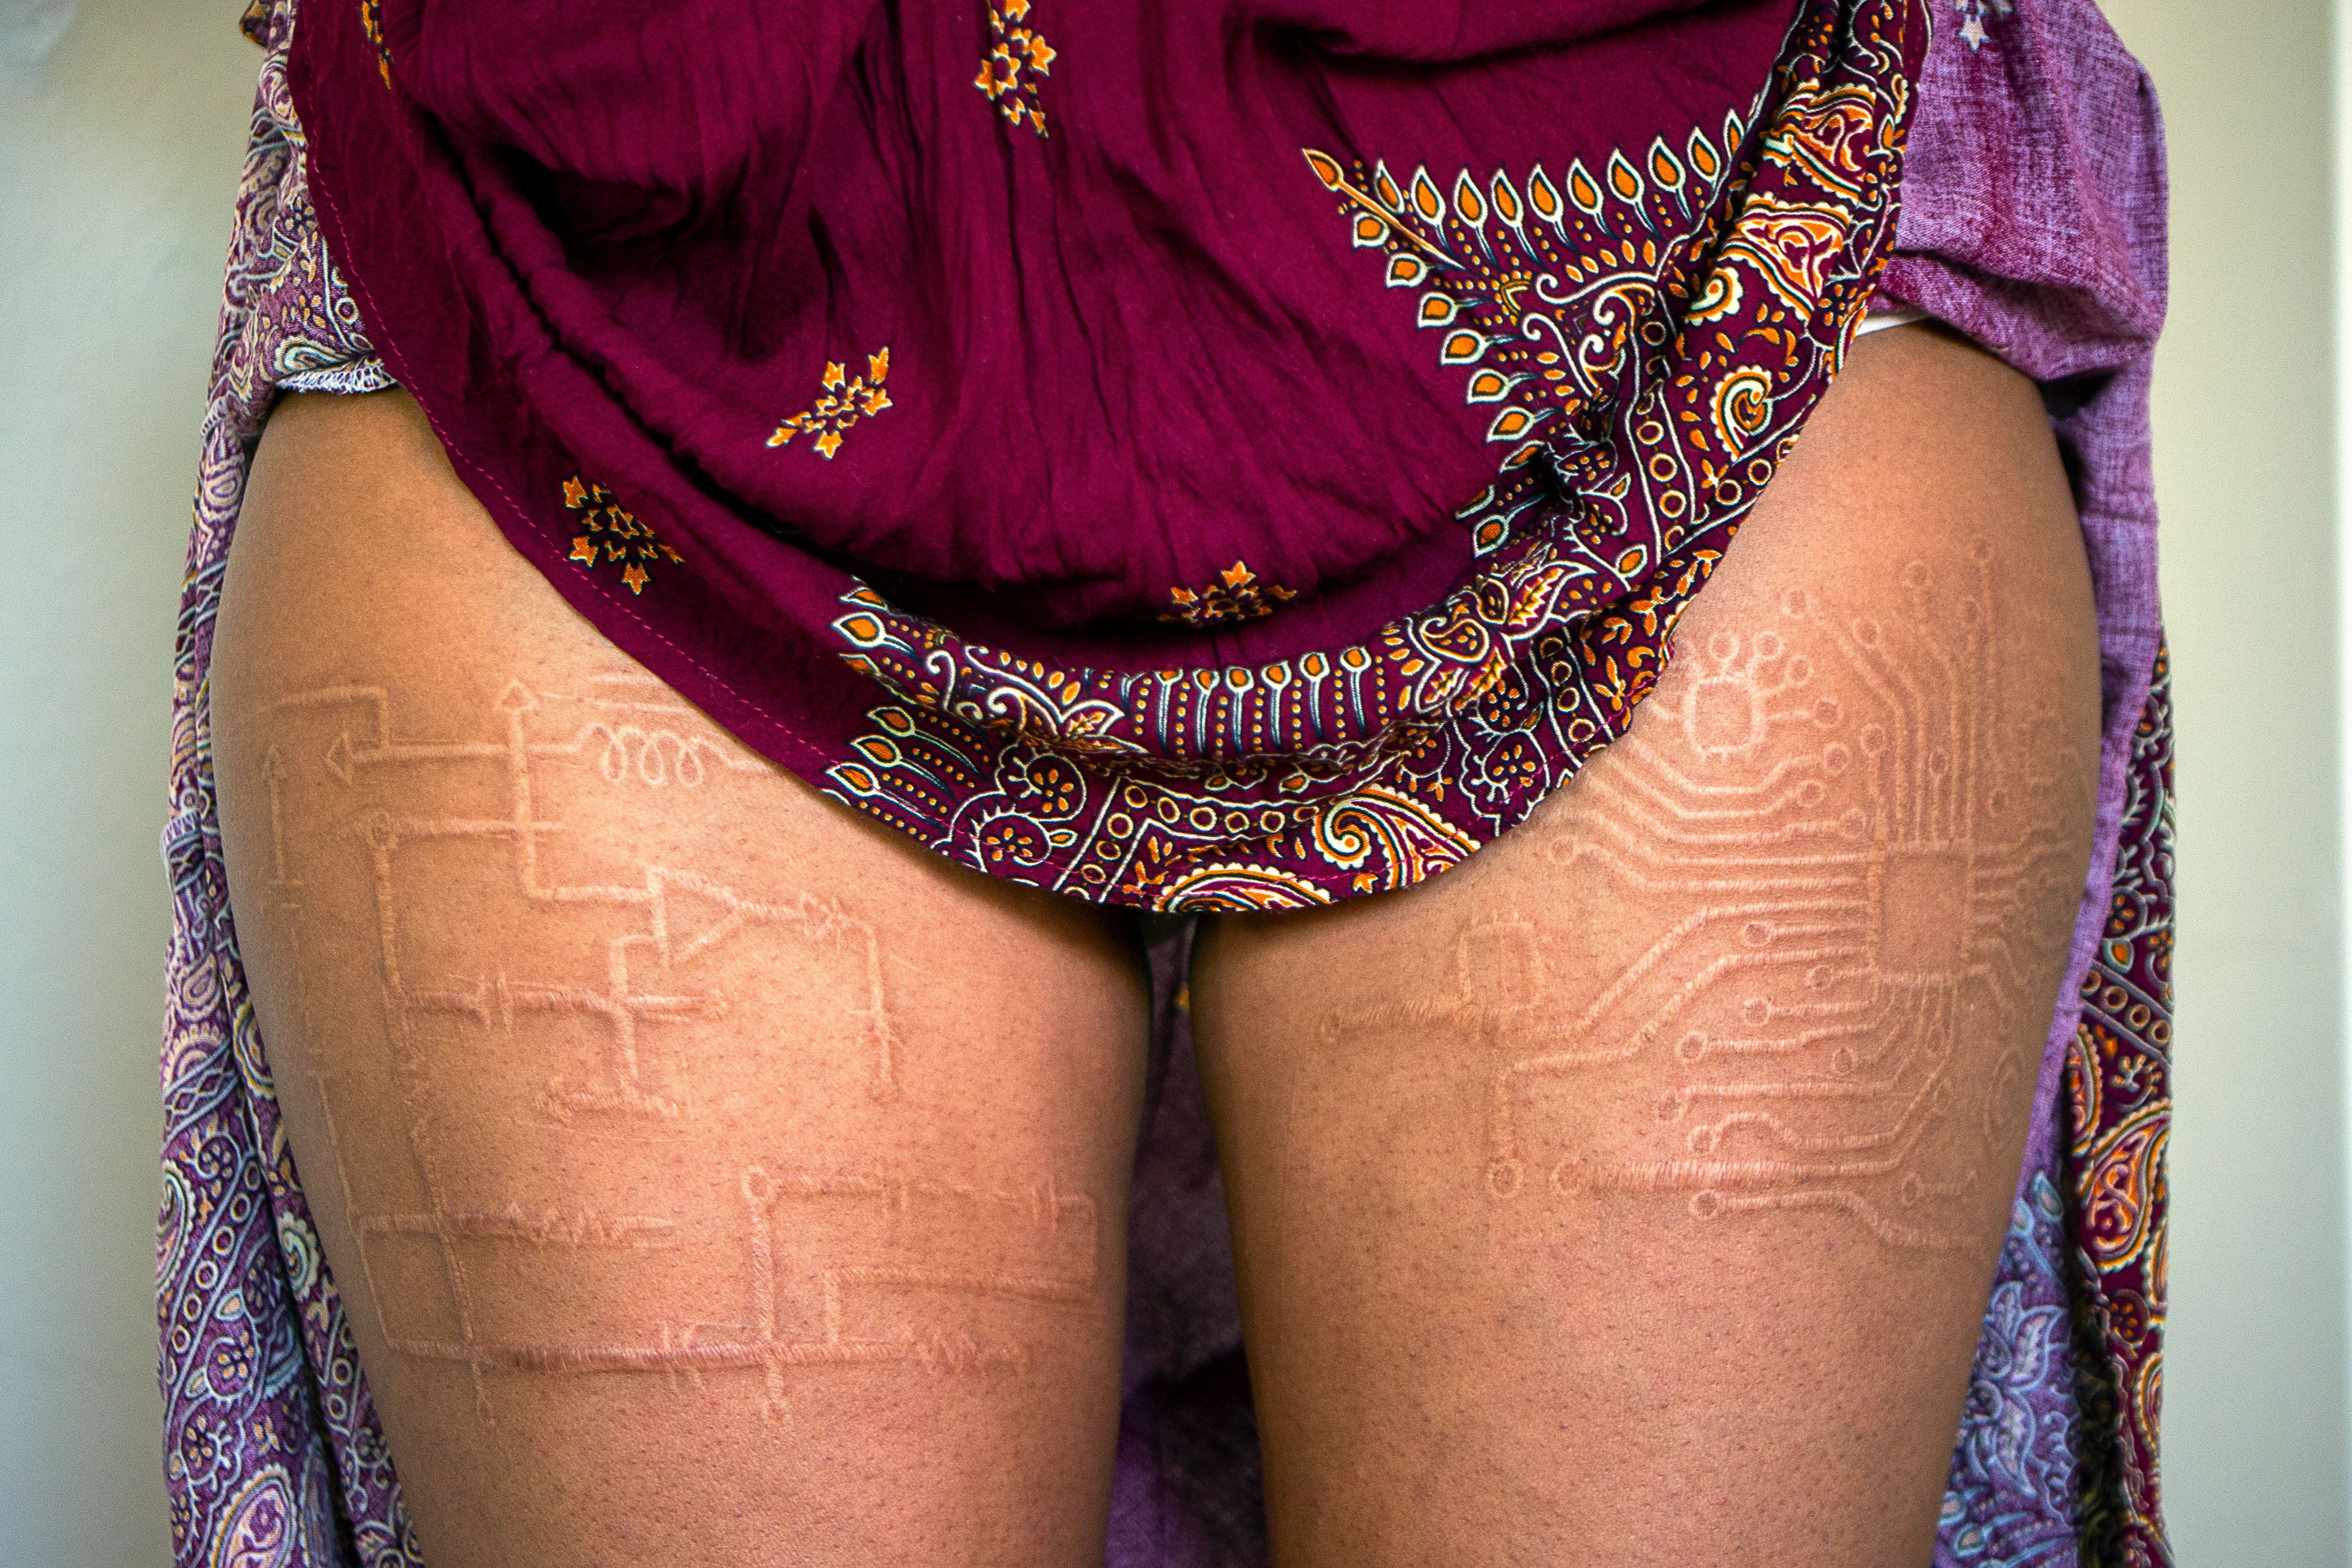 Thigh scarifications on brown skin.